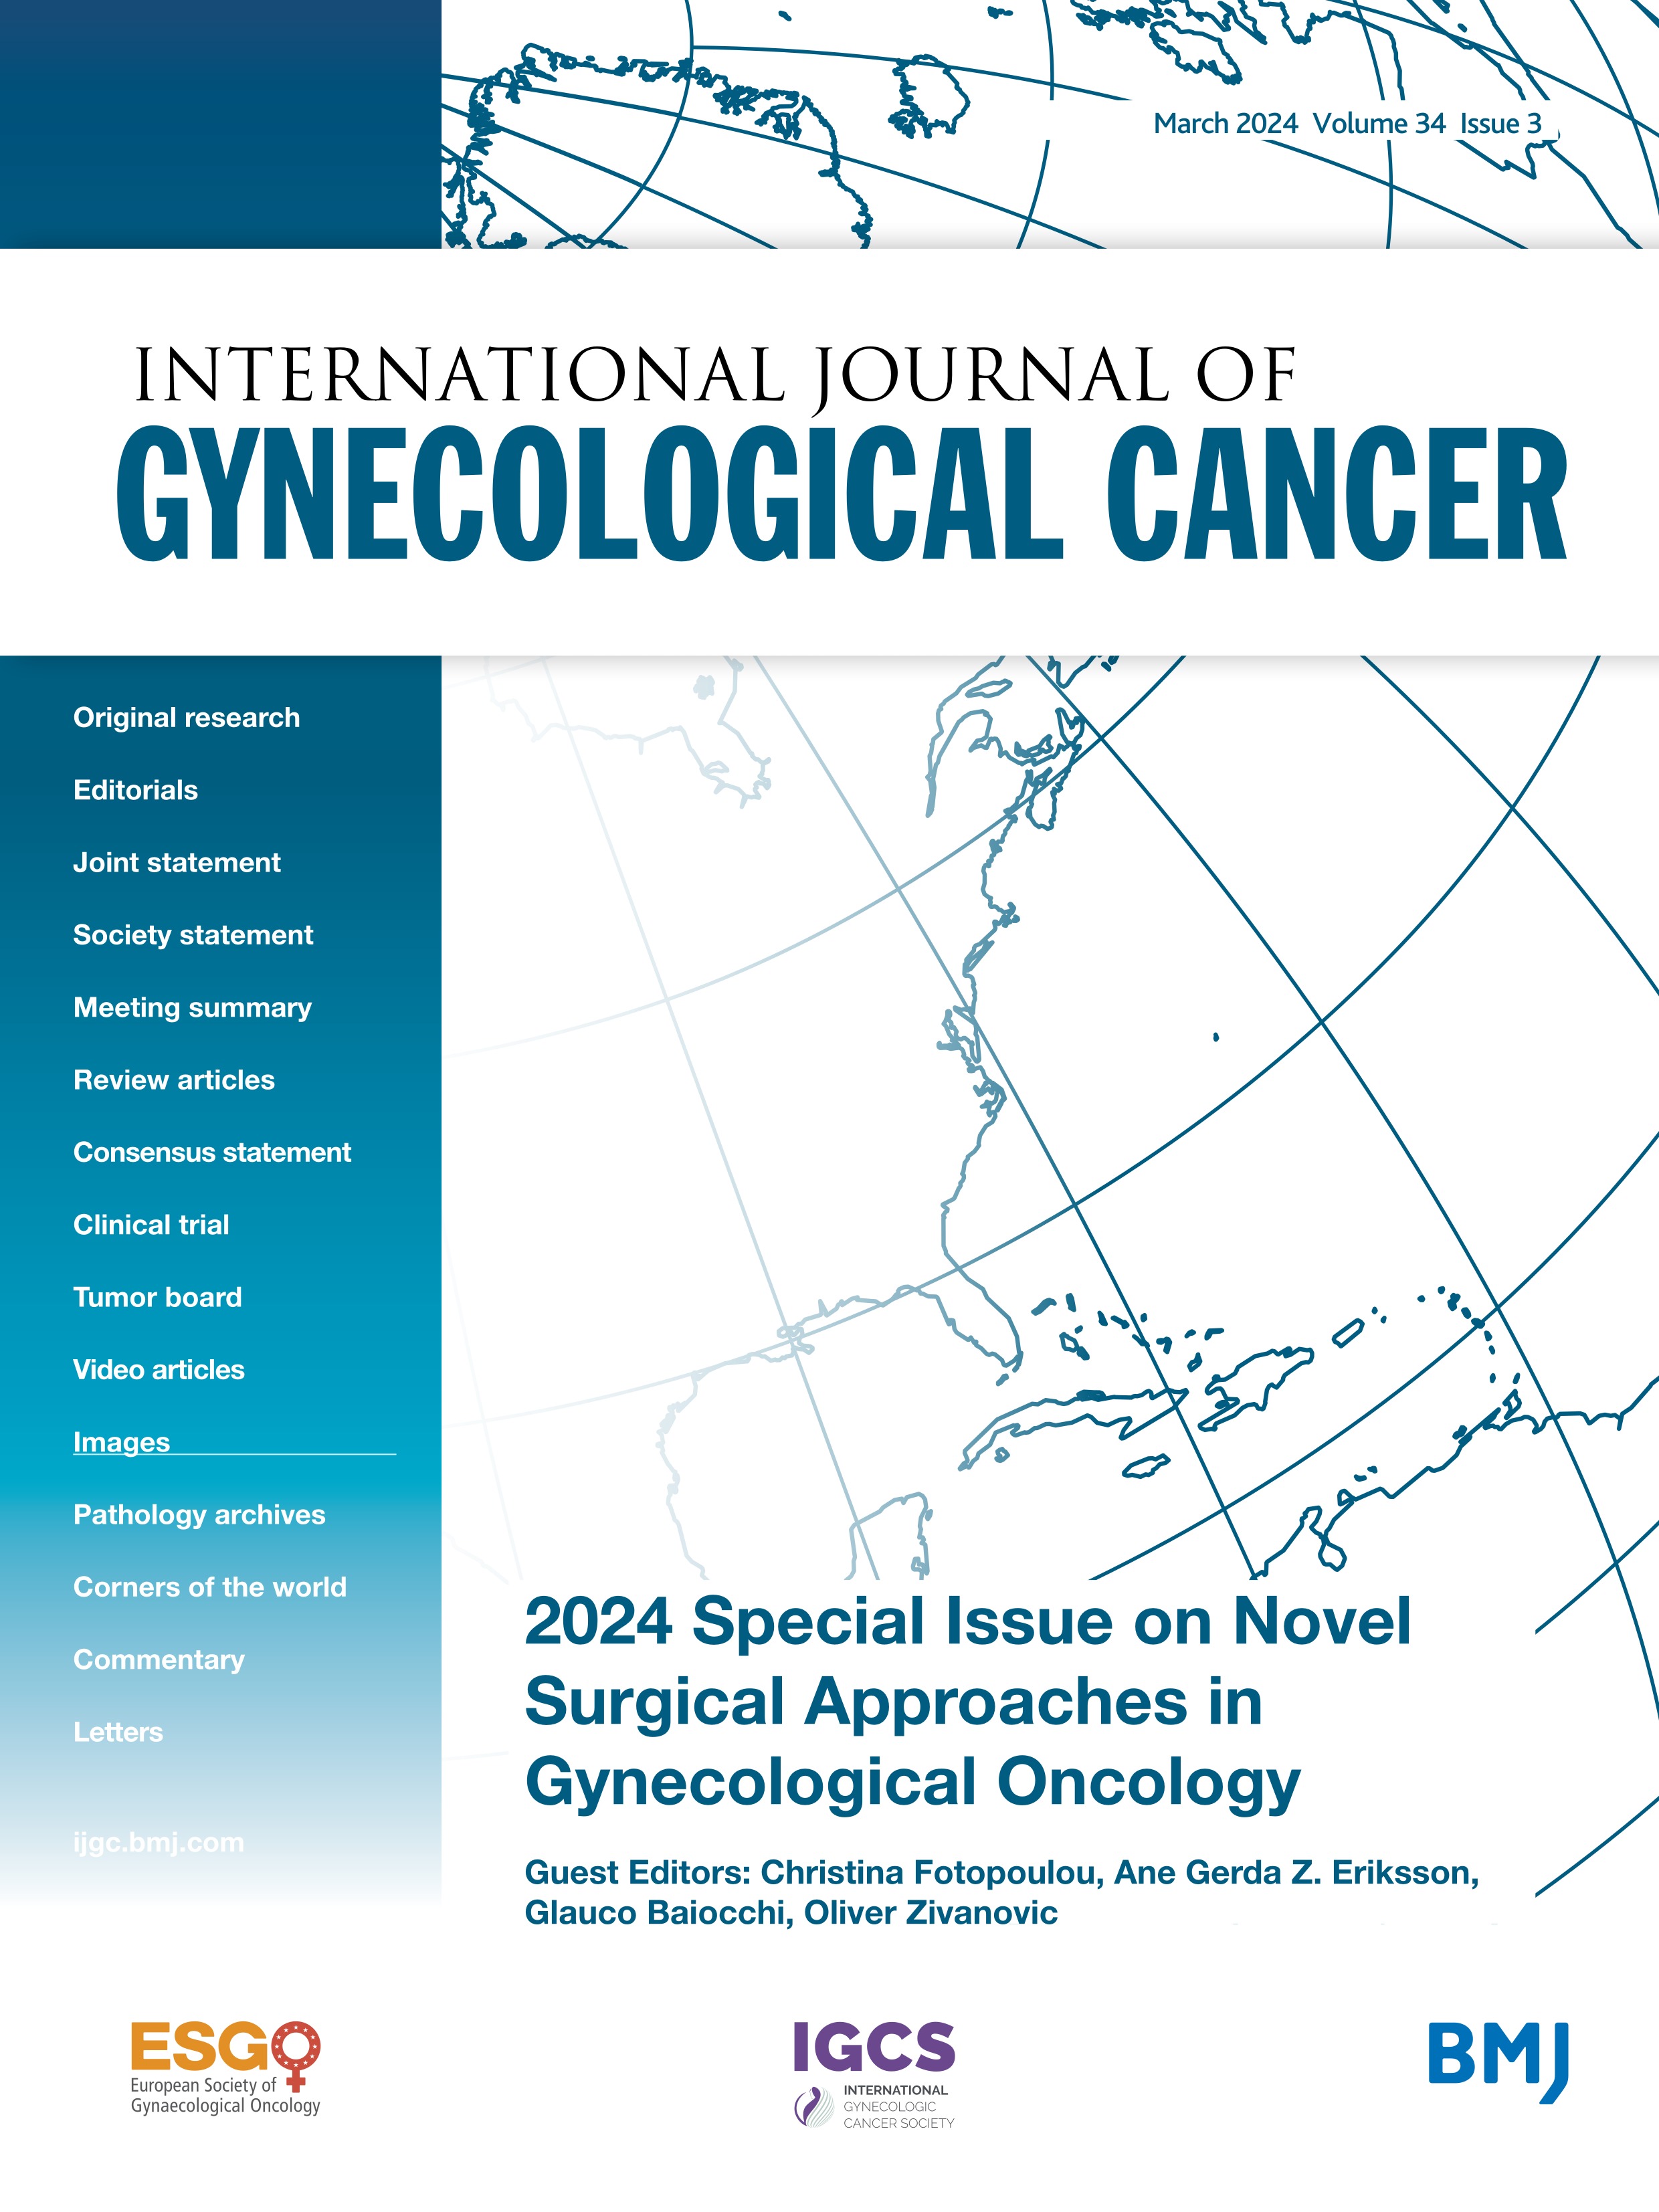 Trends and current aspects of reconstructive surgery for gynecological cancers